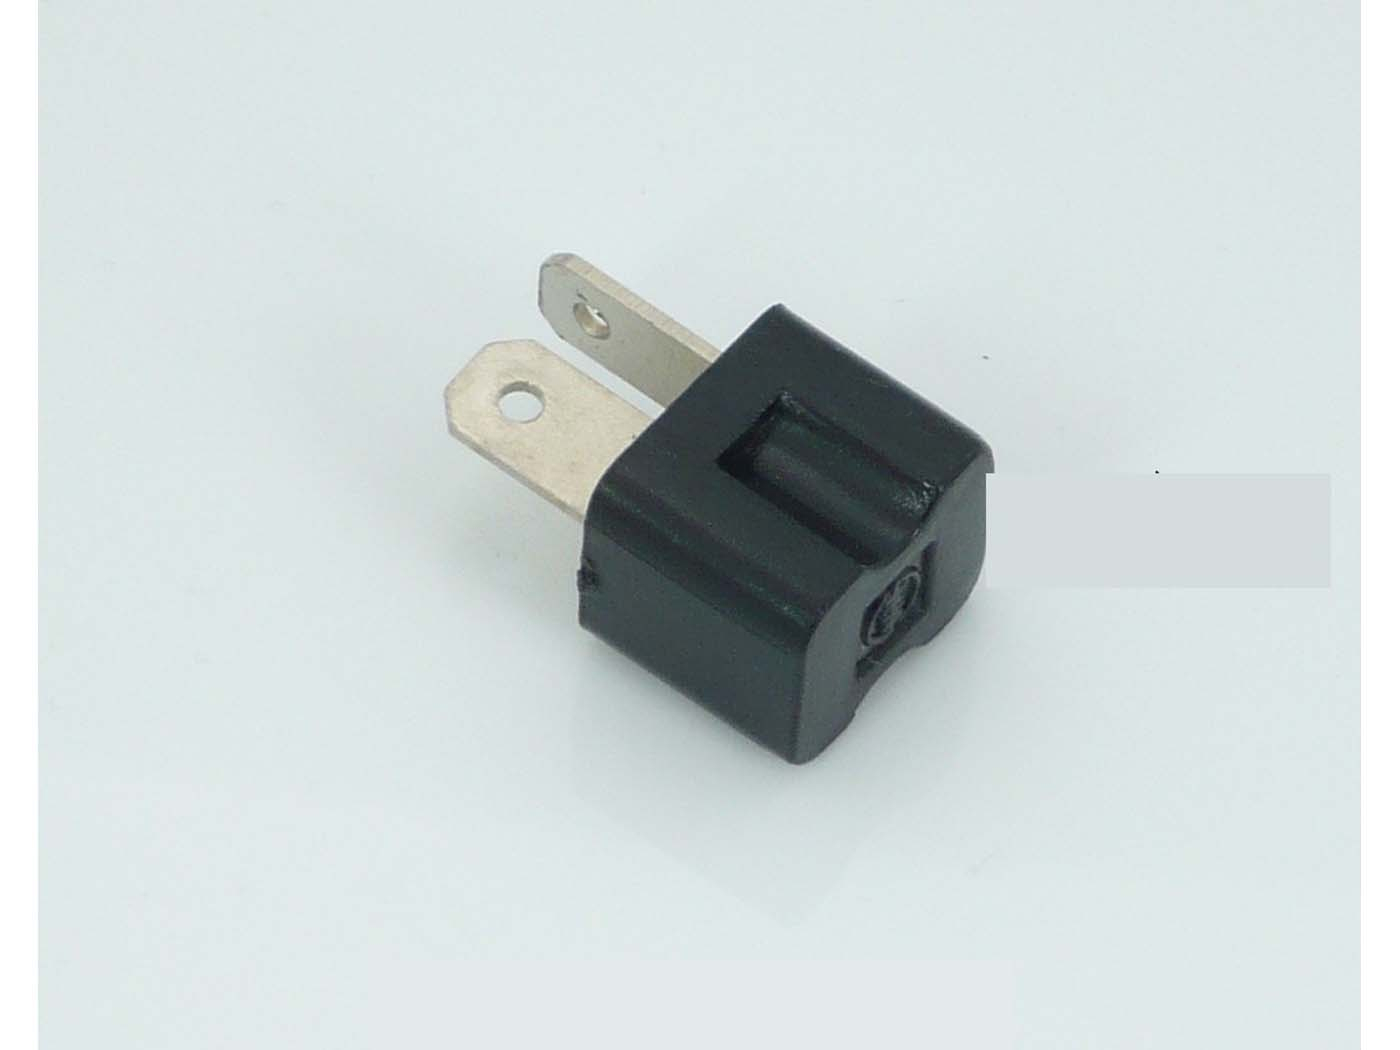 Rectifier Diode For Honda MT MB 50 80